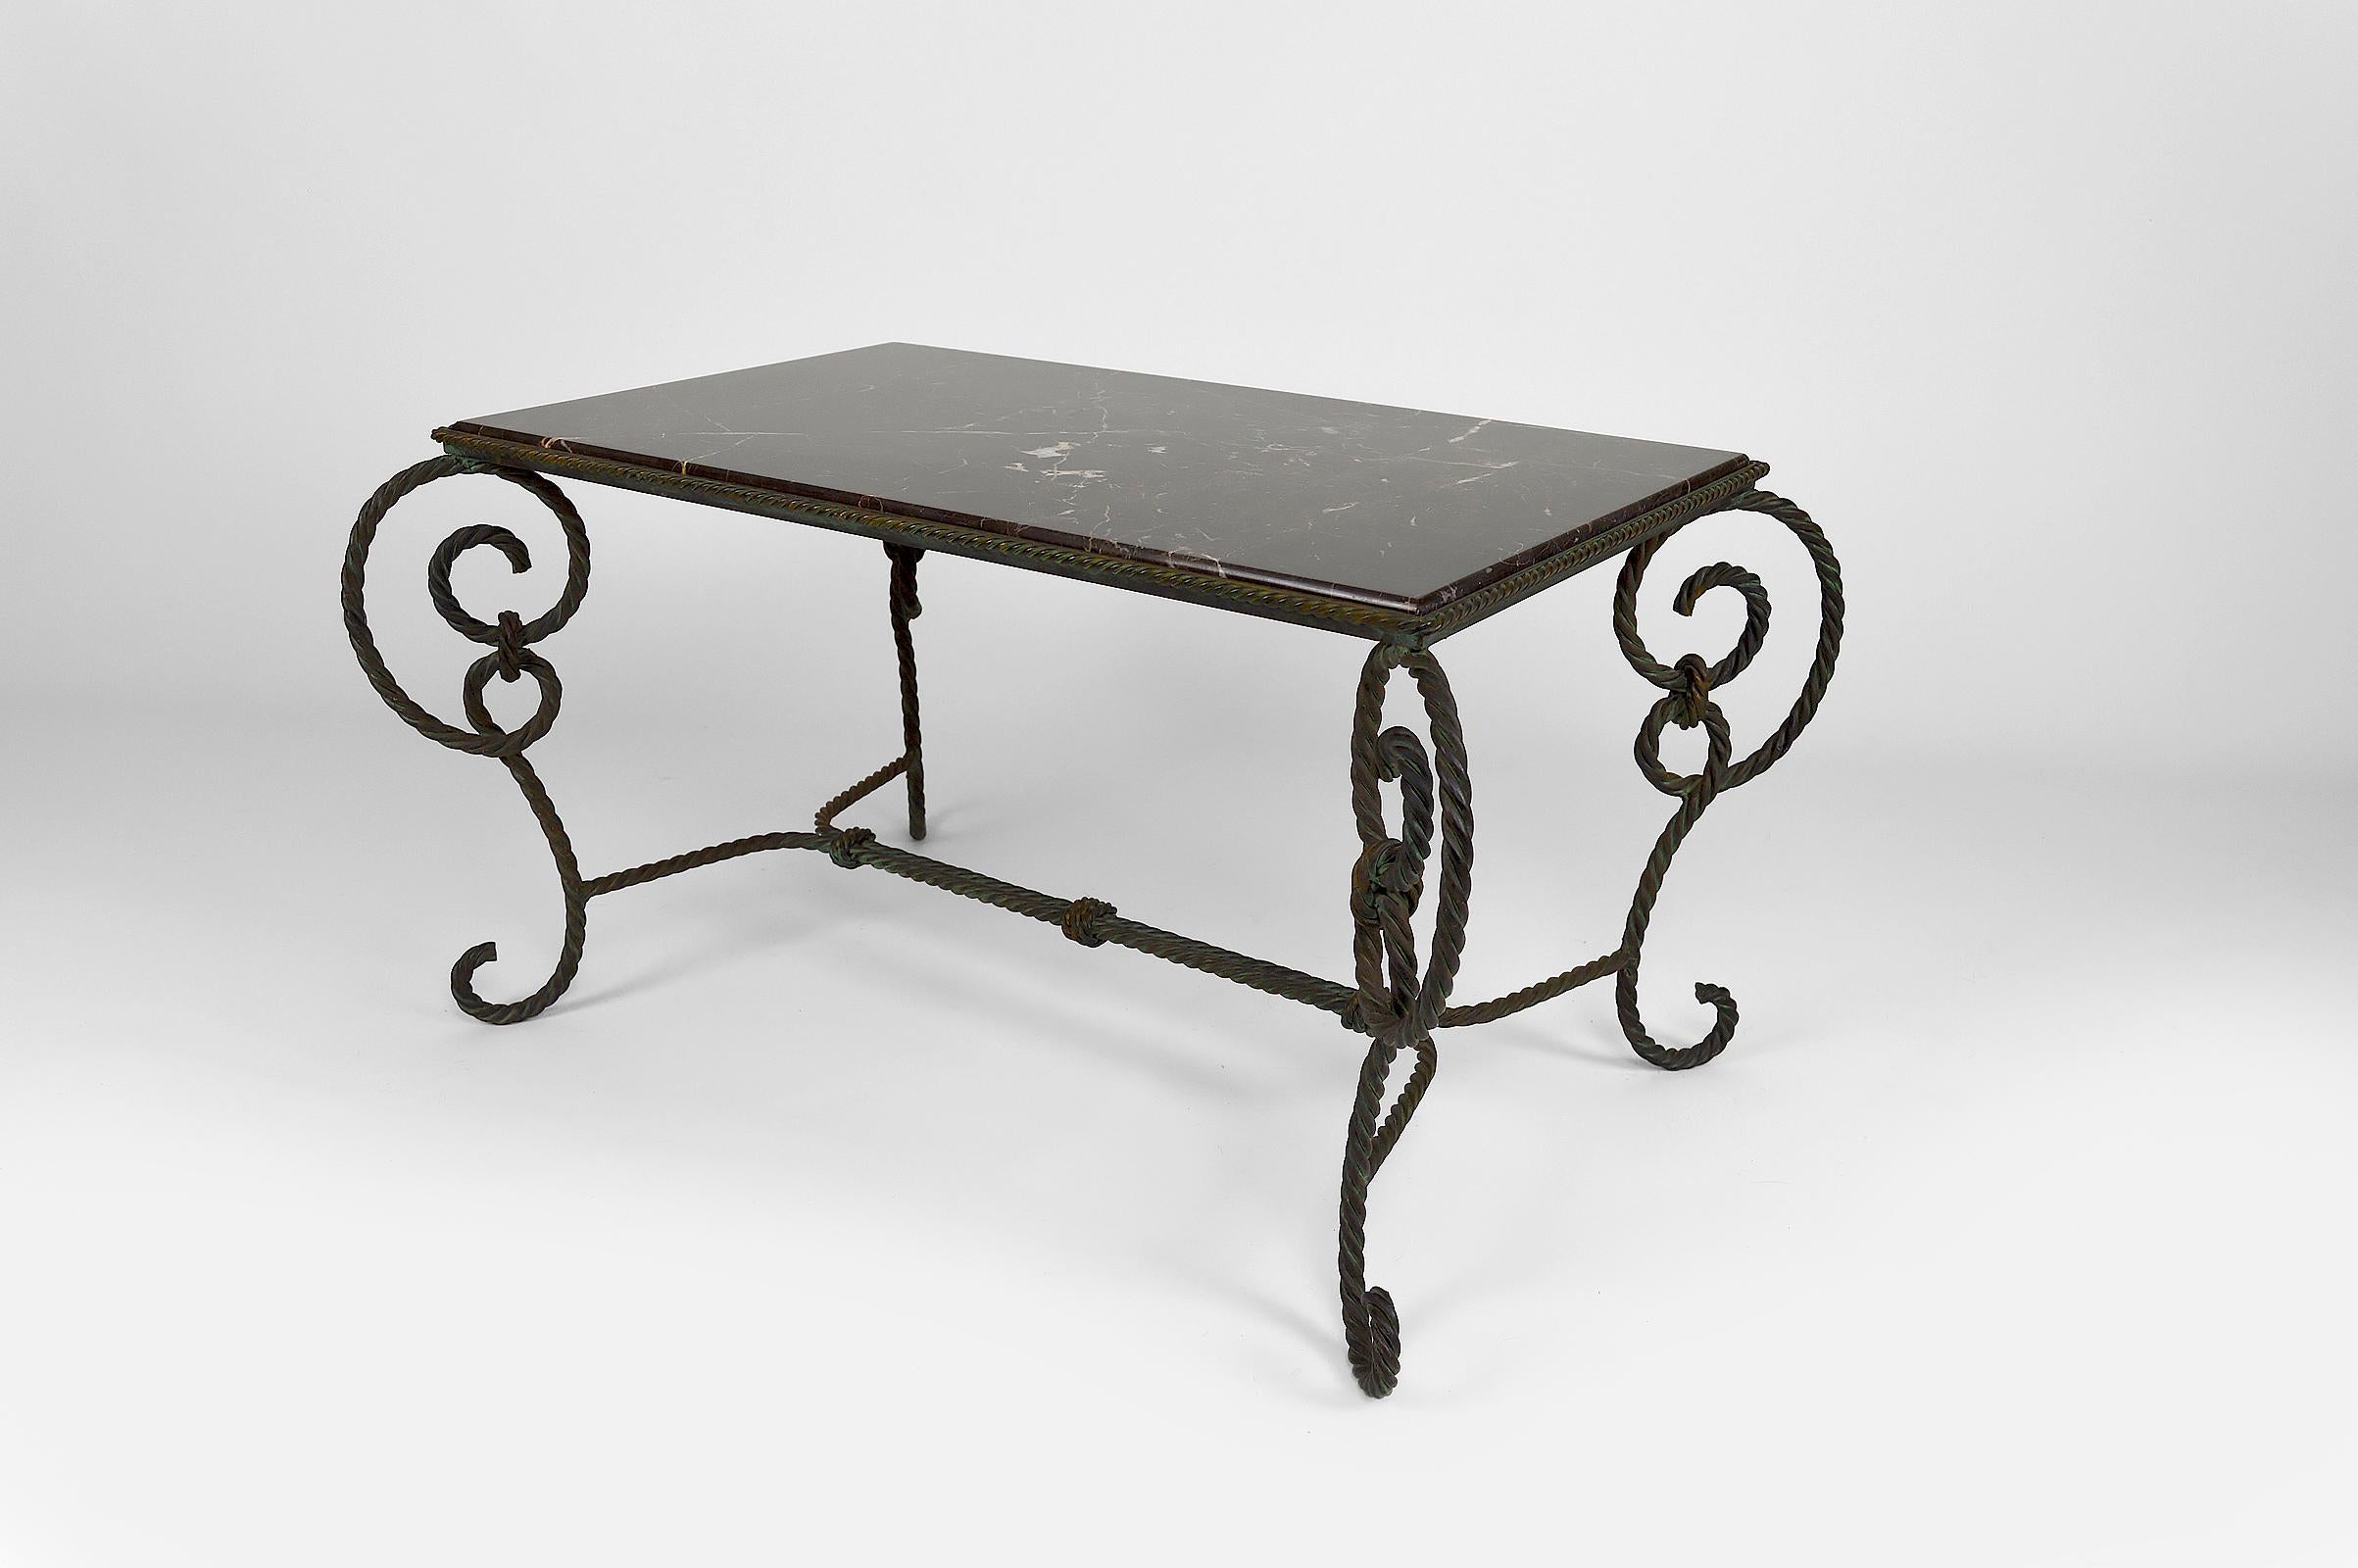 Rectangular Art Deco Coffee Table in Wrought Iron and Black Marble, France, 1940 For Sale 1